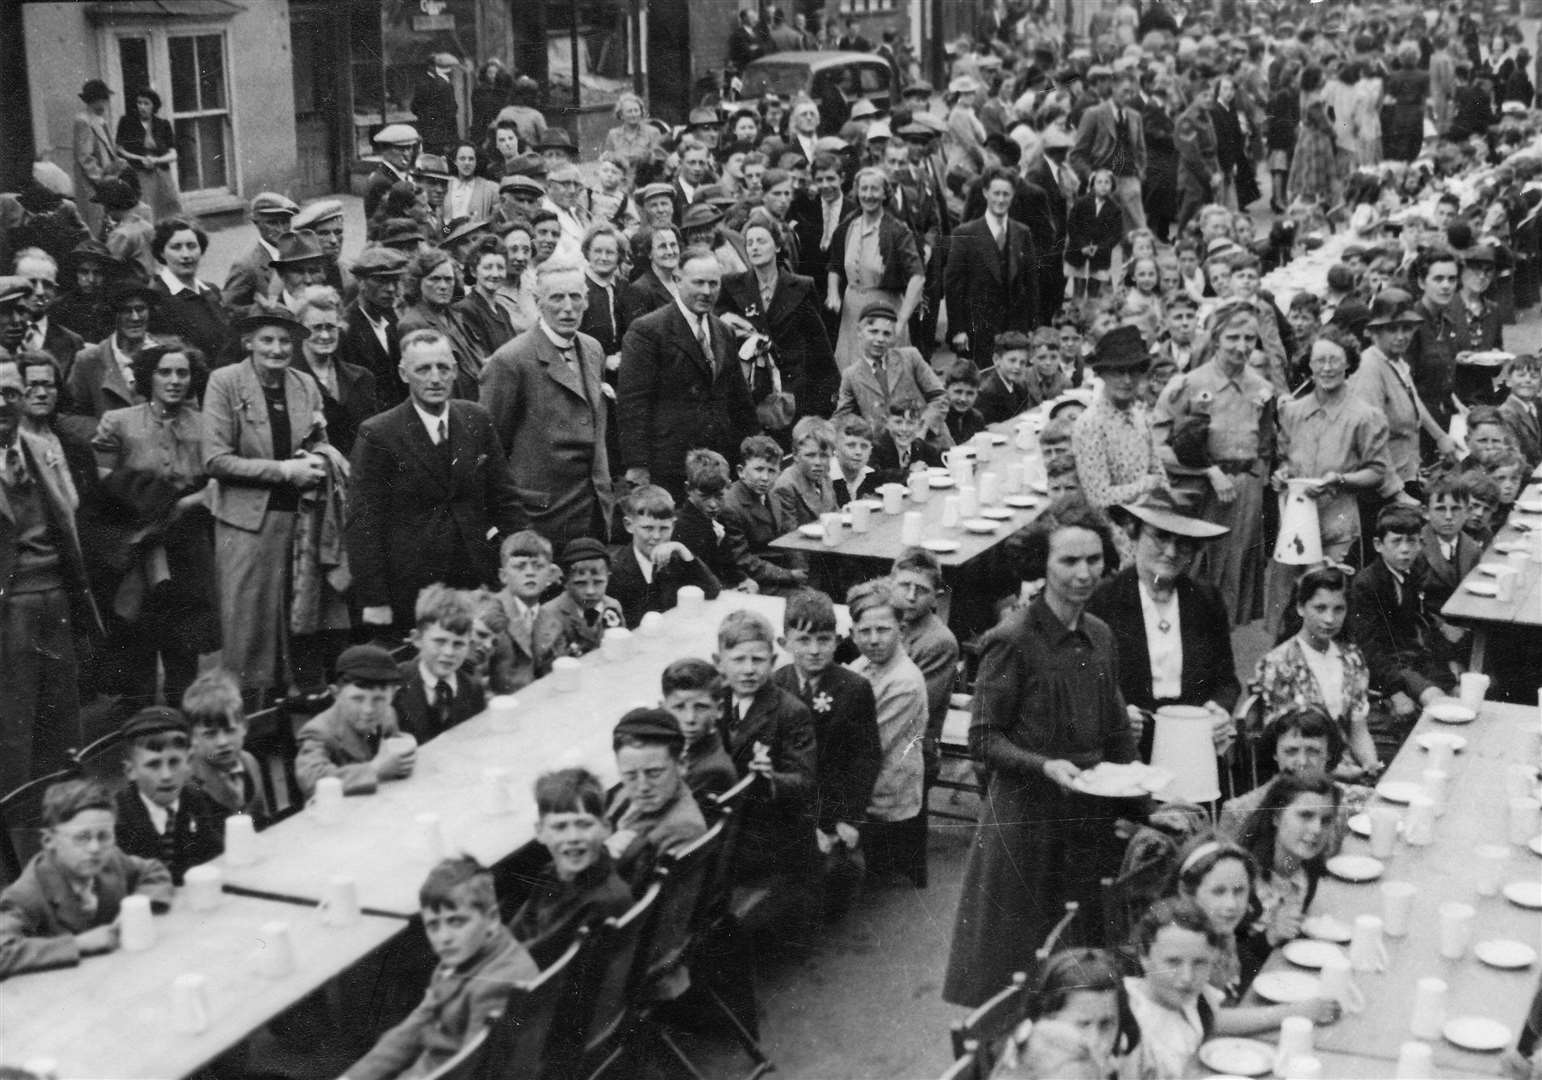 A street party held after the coronation of King George VI and Queen Elizabeth in 1937